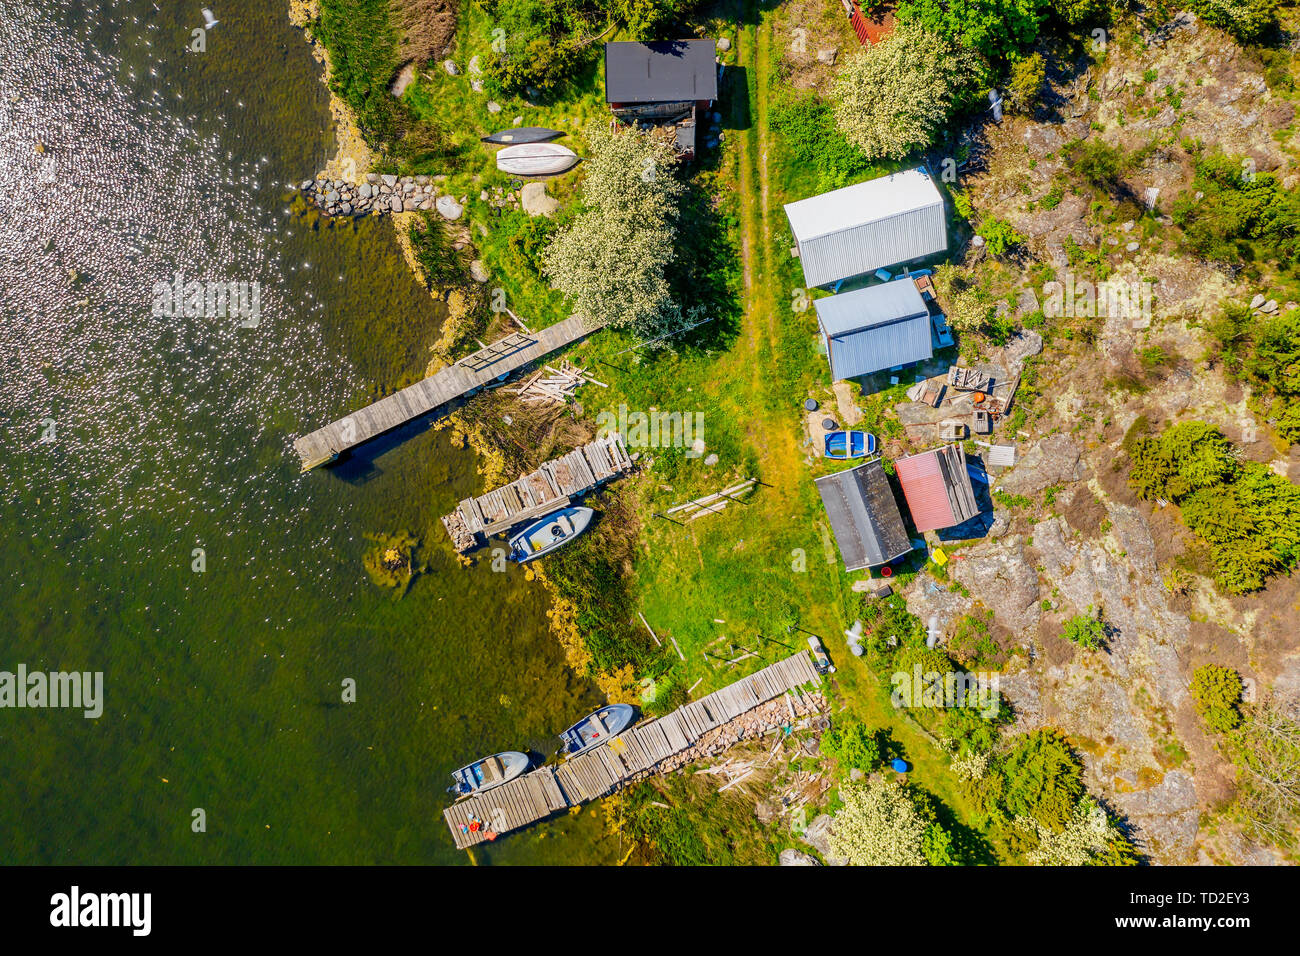 Aerial of a small fishing camp with sheds, boats and jetties. Location Hasslo island in Blekinge archipelago, Sweden. Stock Photo